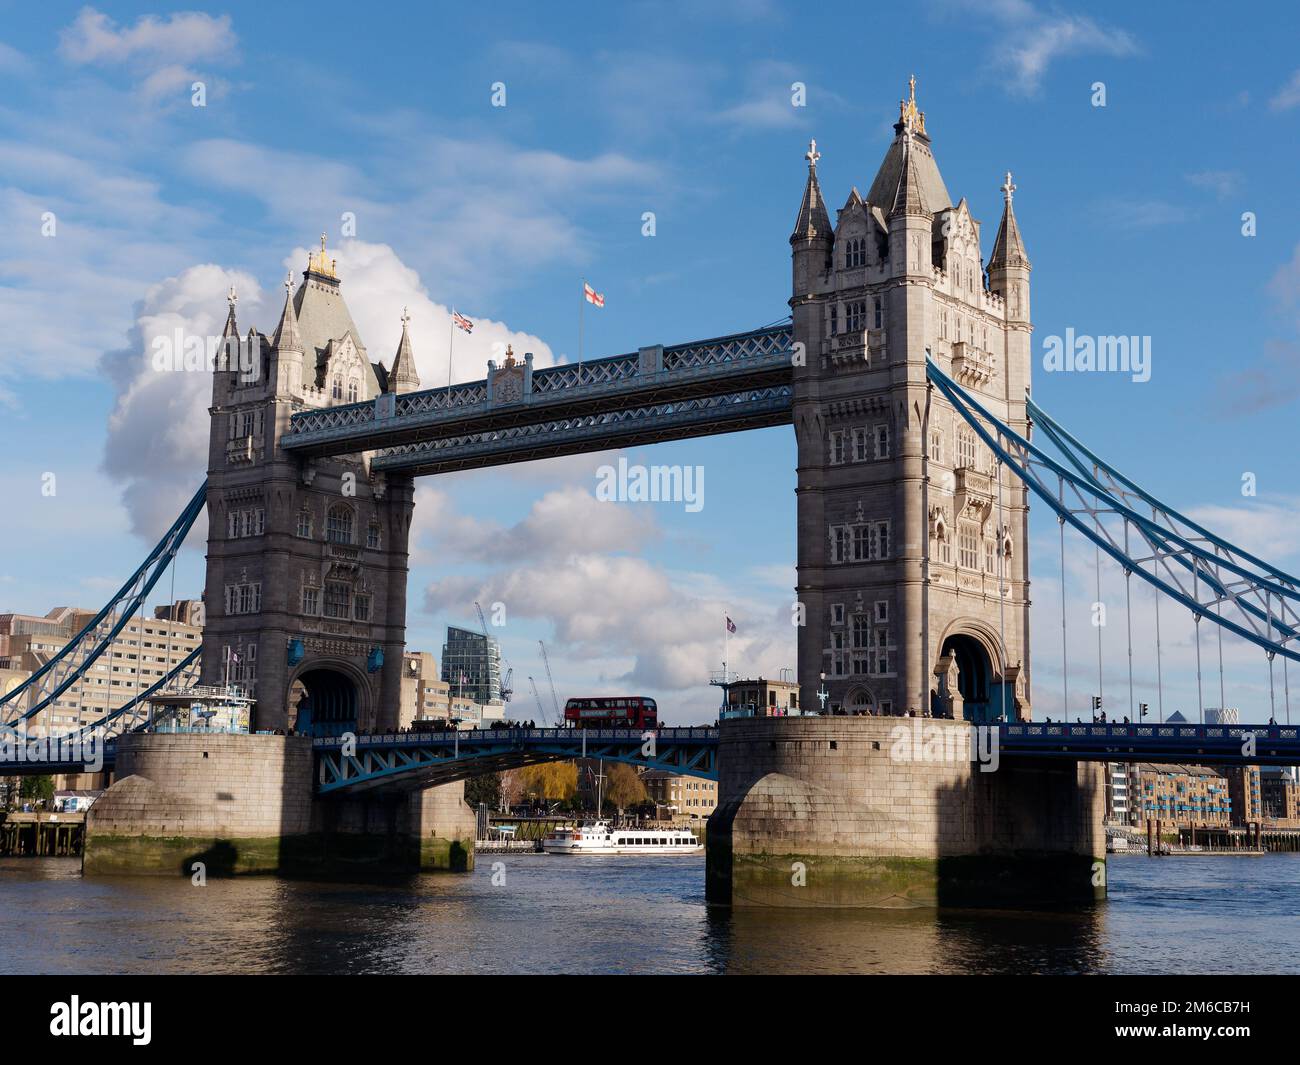 A bus passes over the famous Tower Bridge in London, England Stock Photo